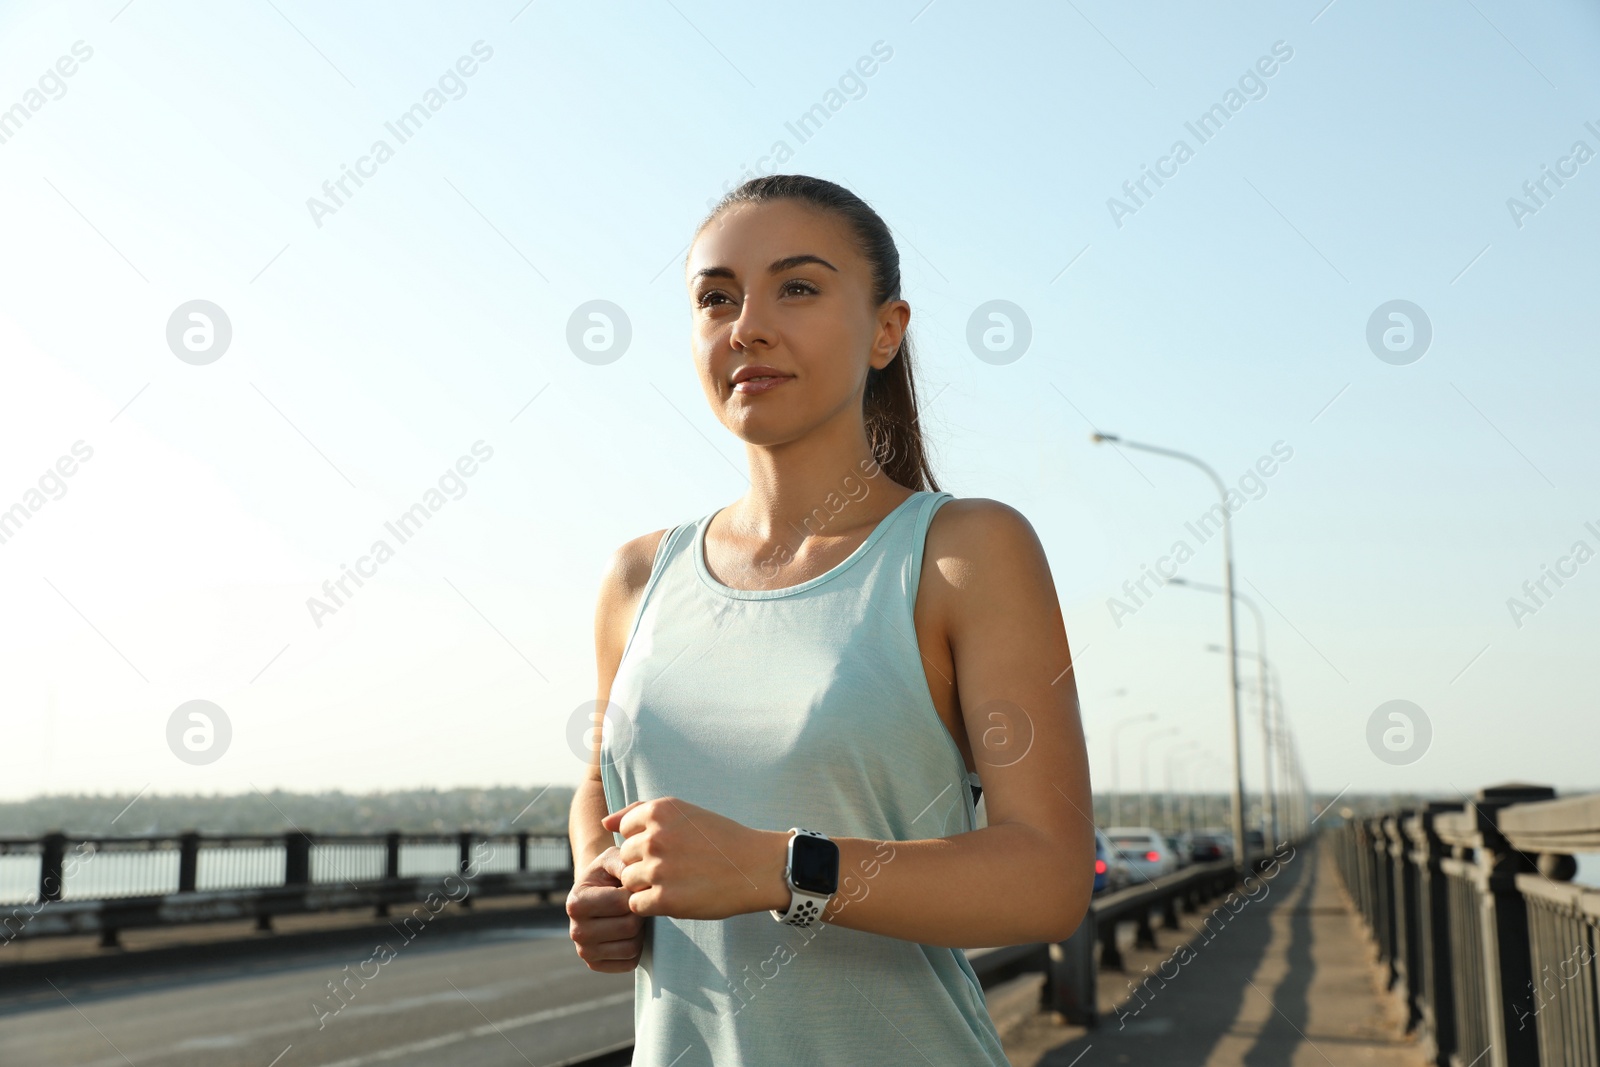 Photo of Woman wearing modern smart watch during training outdoors